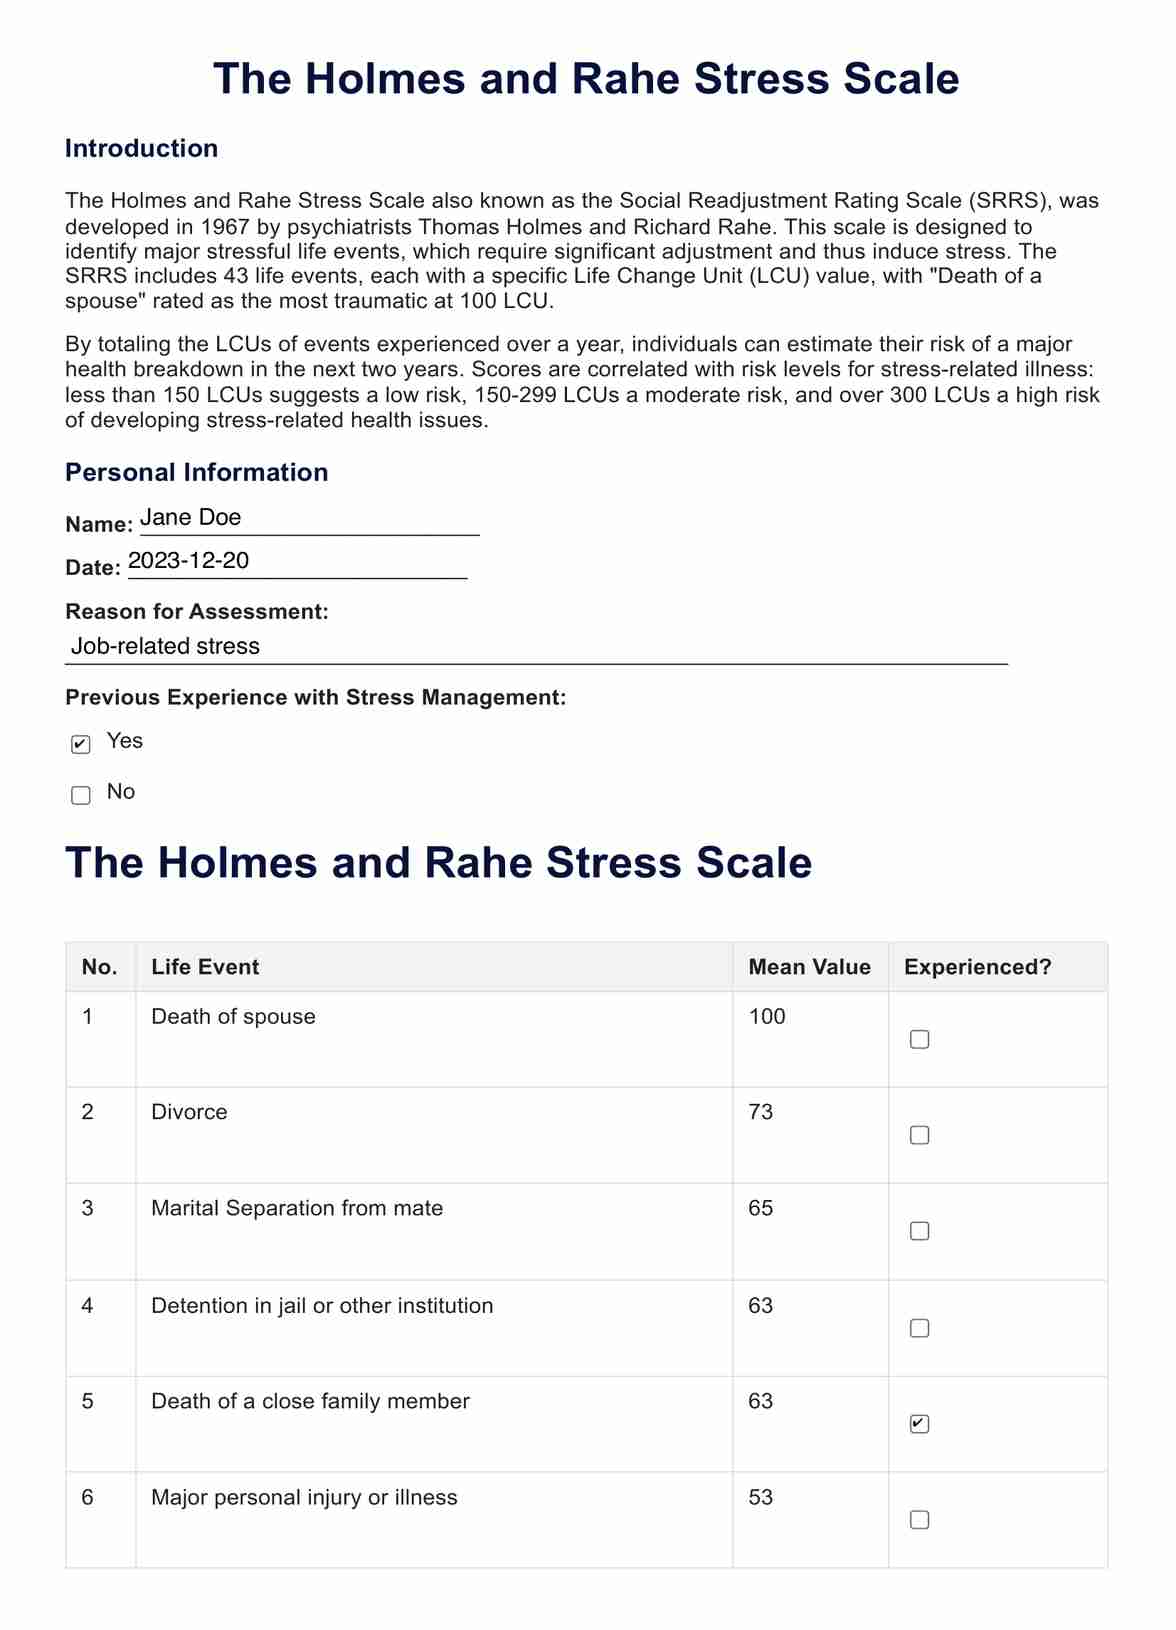 The Holmes and Rahe Stress Scale PDF Example